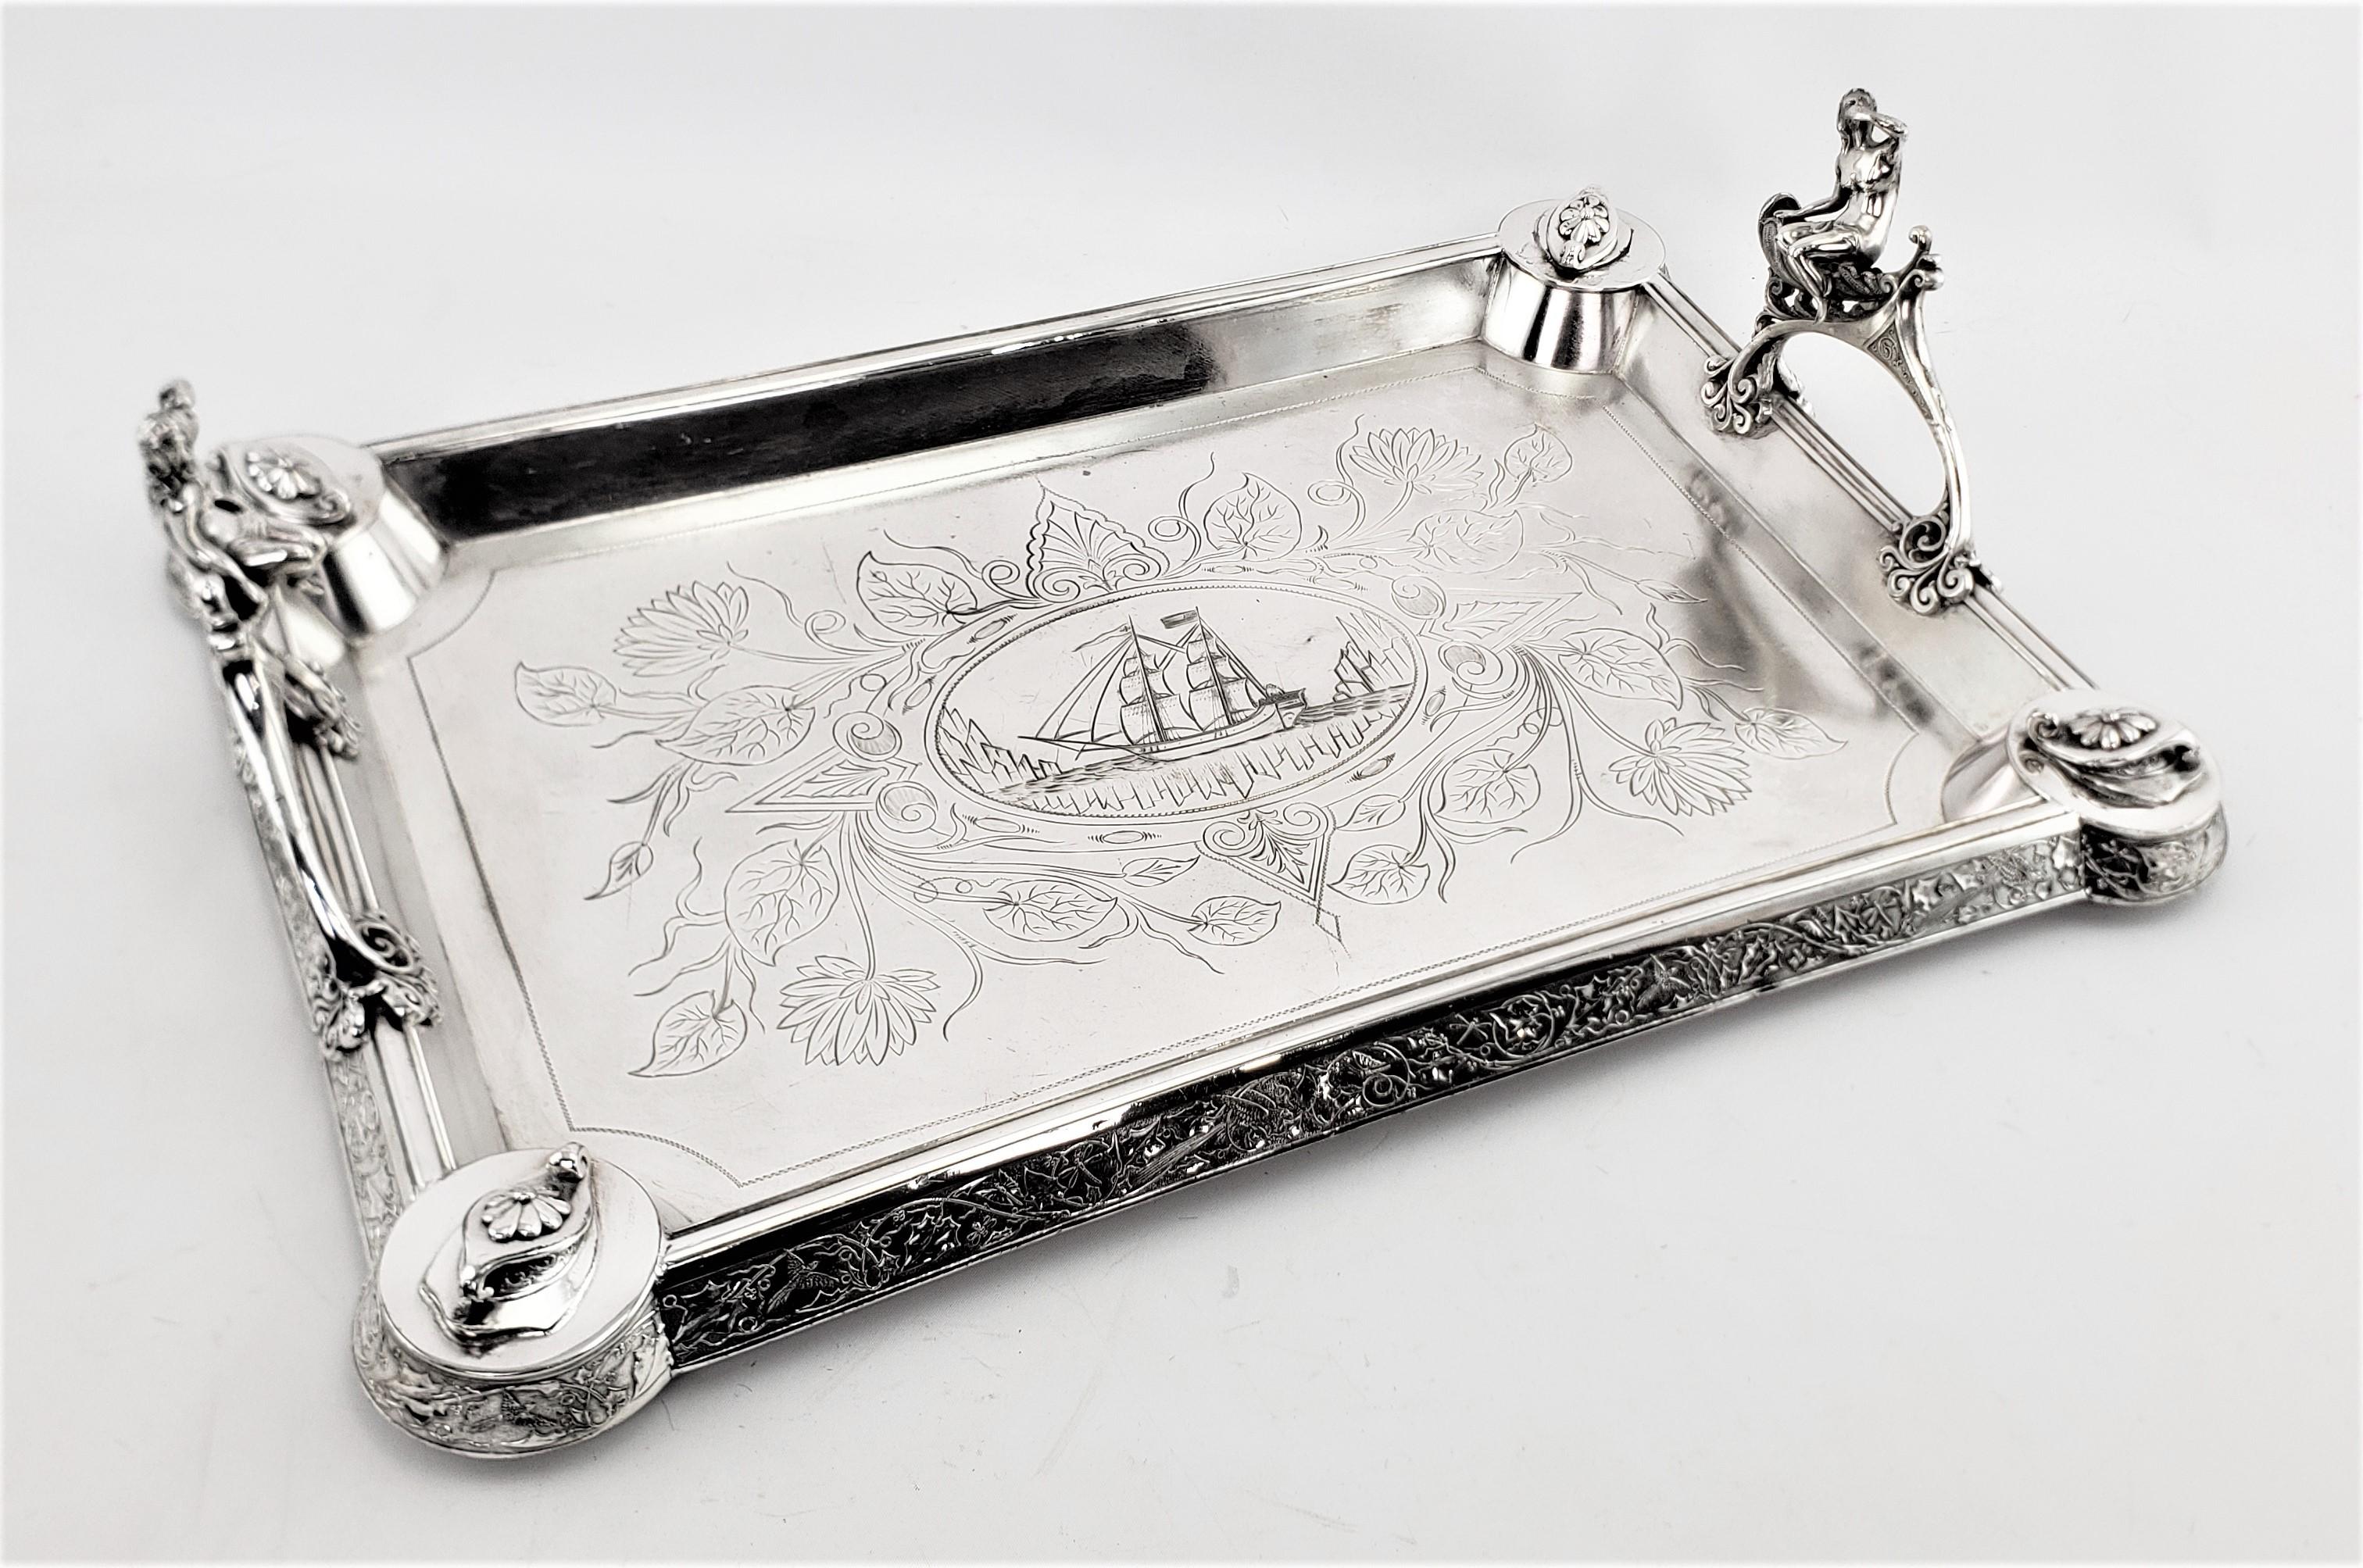 Antique Aesthetic Movement Silver Plated Serving Tray with Figural Siren Handles For Sale 10